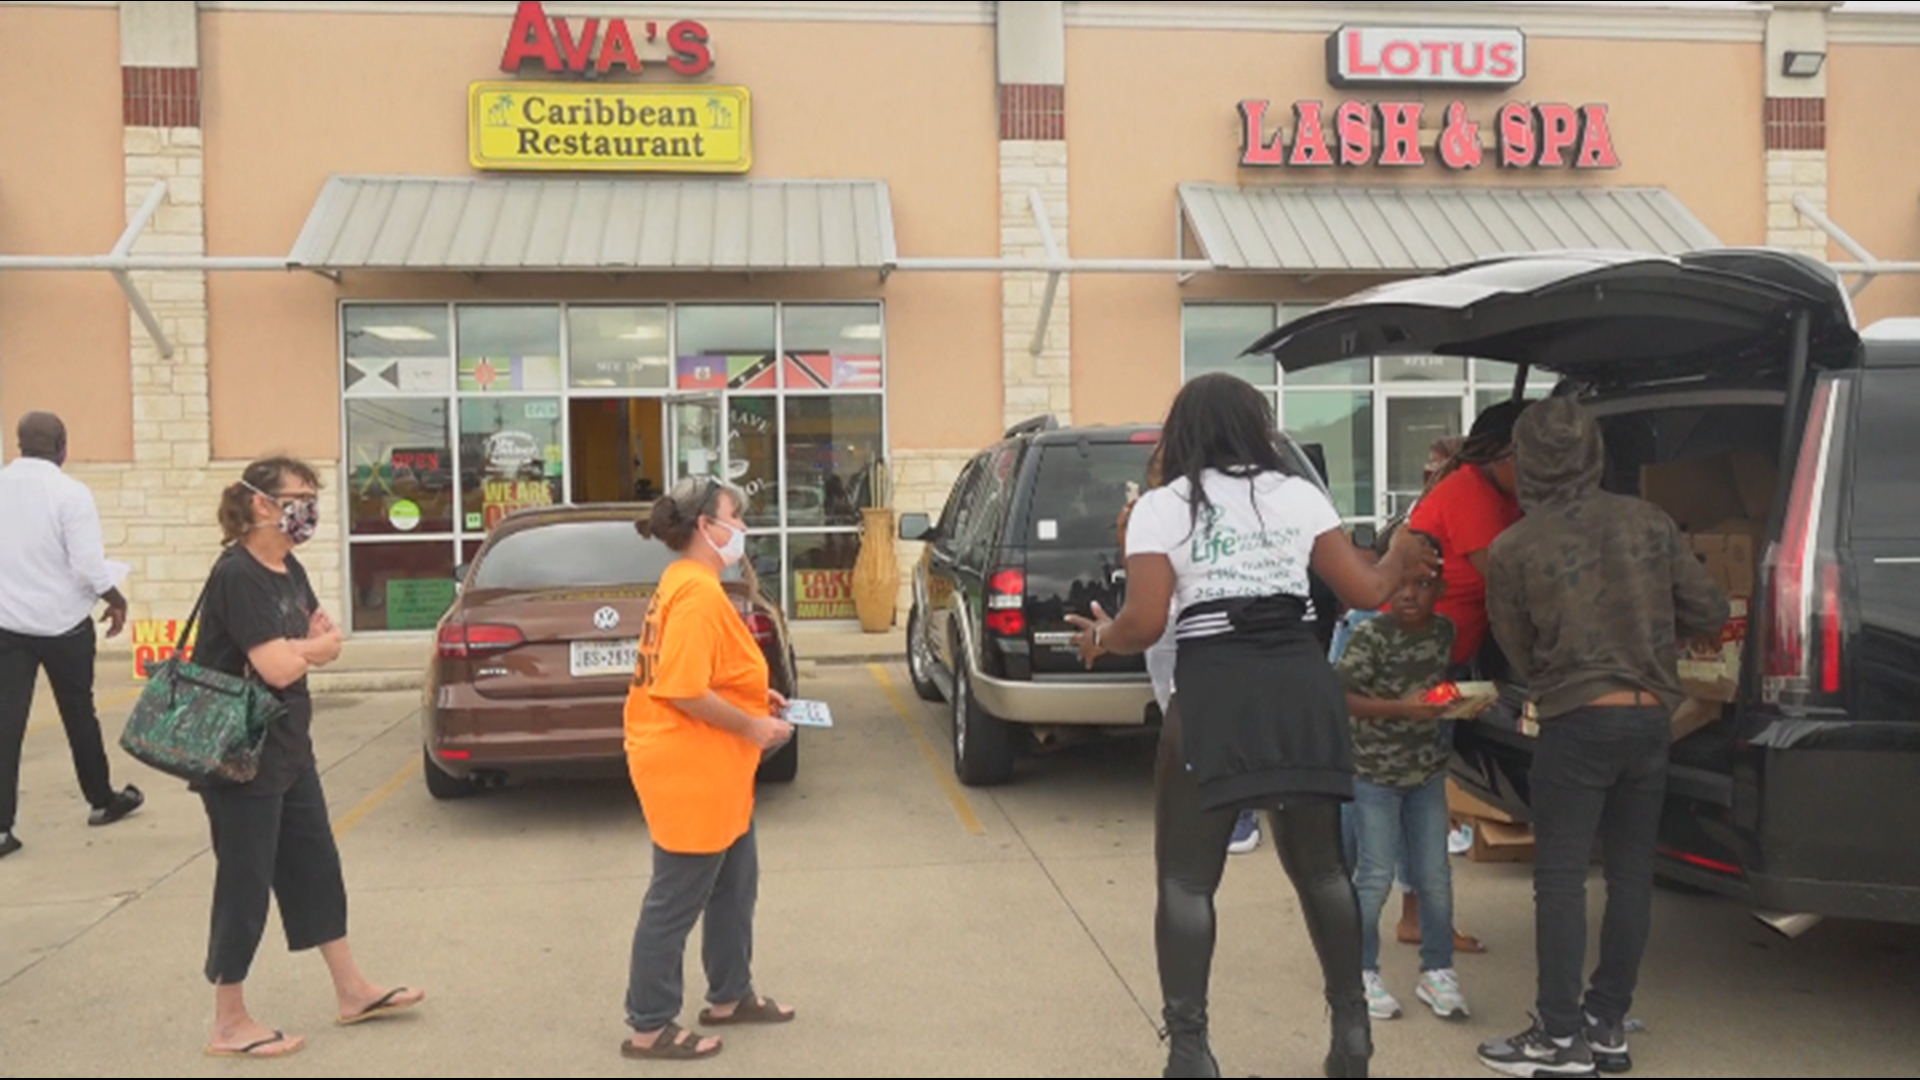 Ava's Caribbean Restaurant gave out a turkey and a box of stuffing to local families in hopes of making sure everyone has a Thanksgiving dinner.